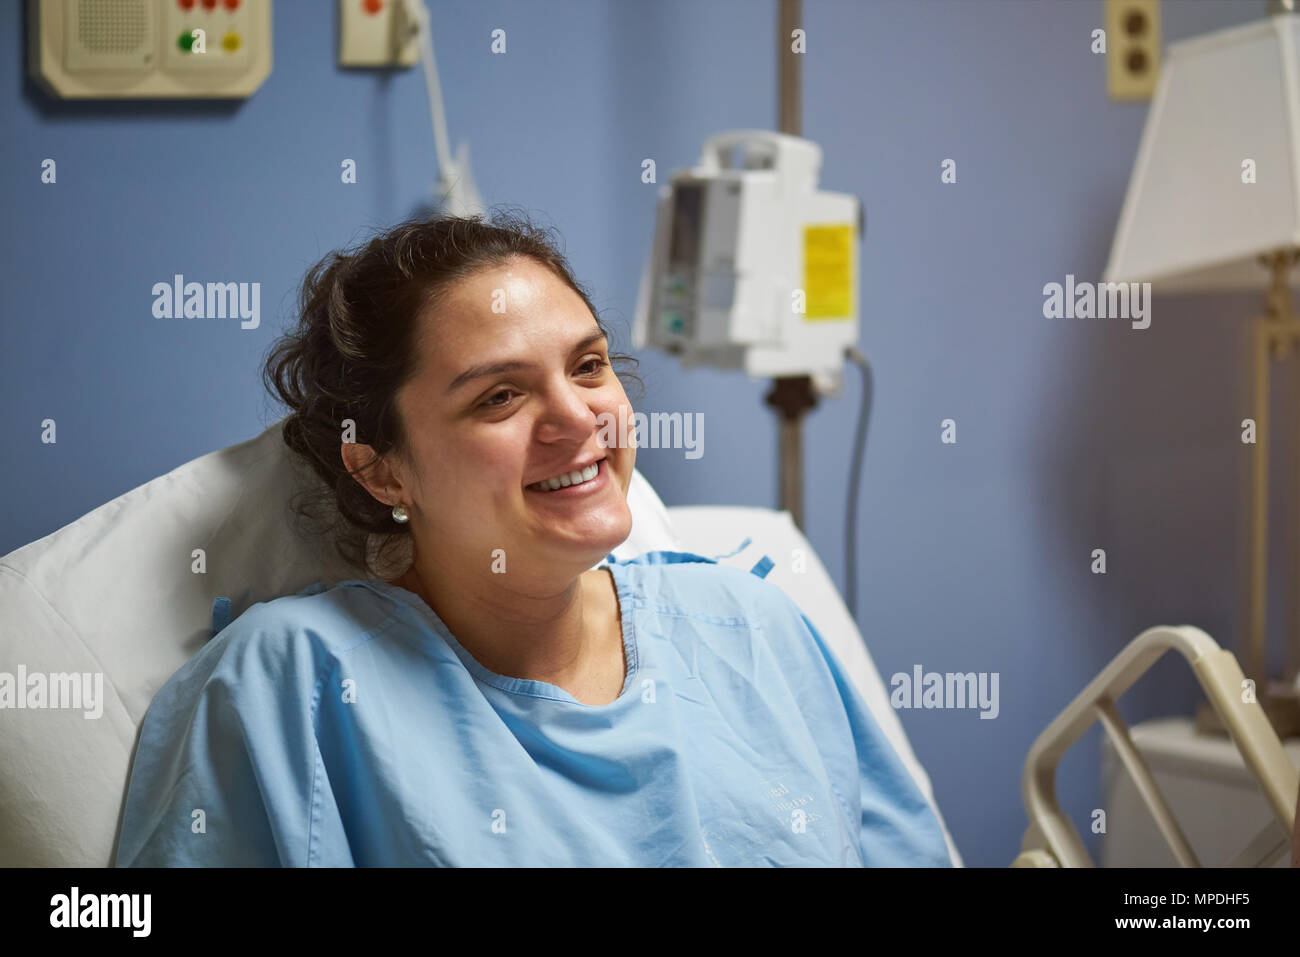 Happy smiling patient in hospital. Young hispanic woman patient Stock Photo